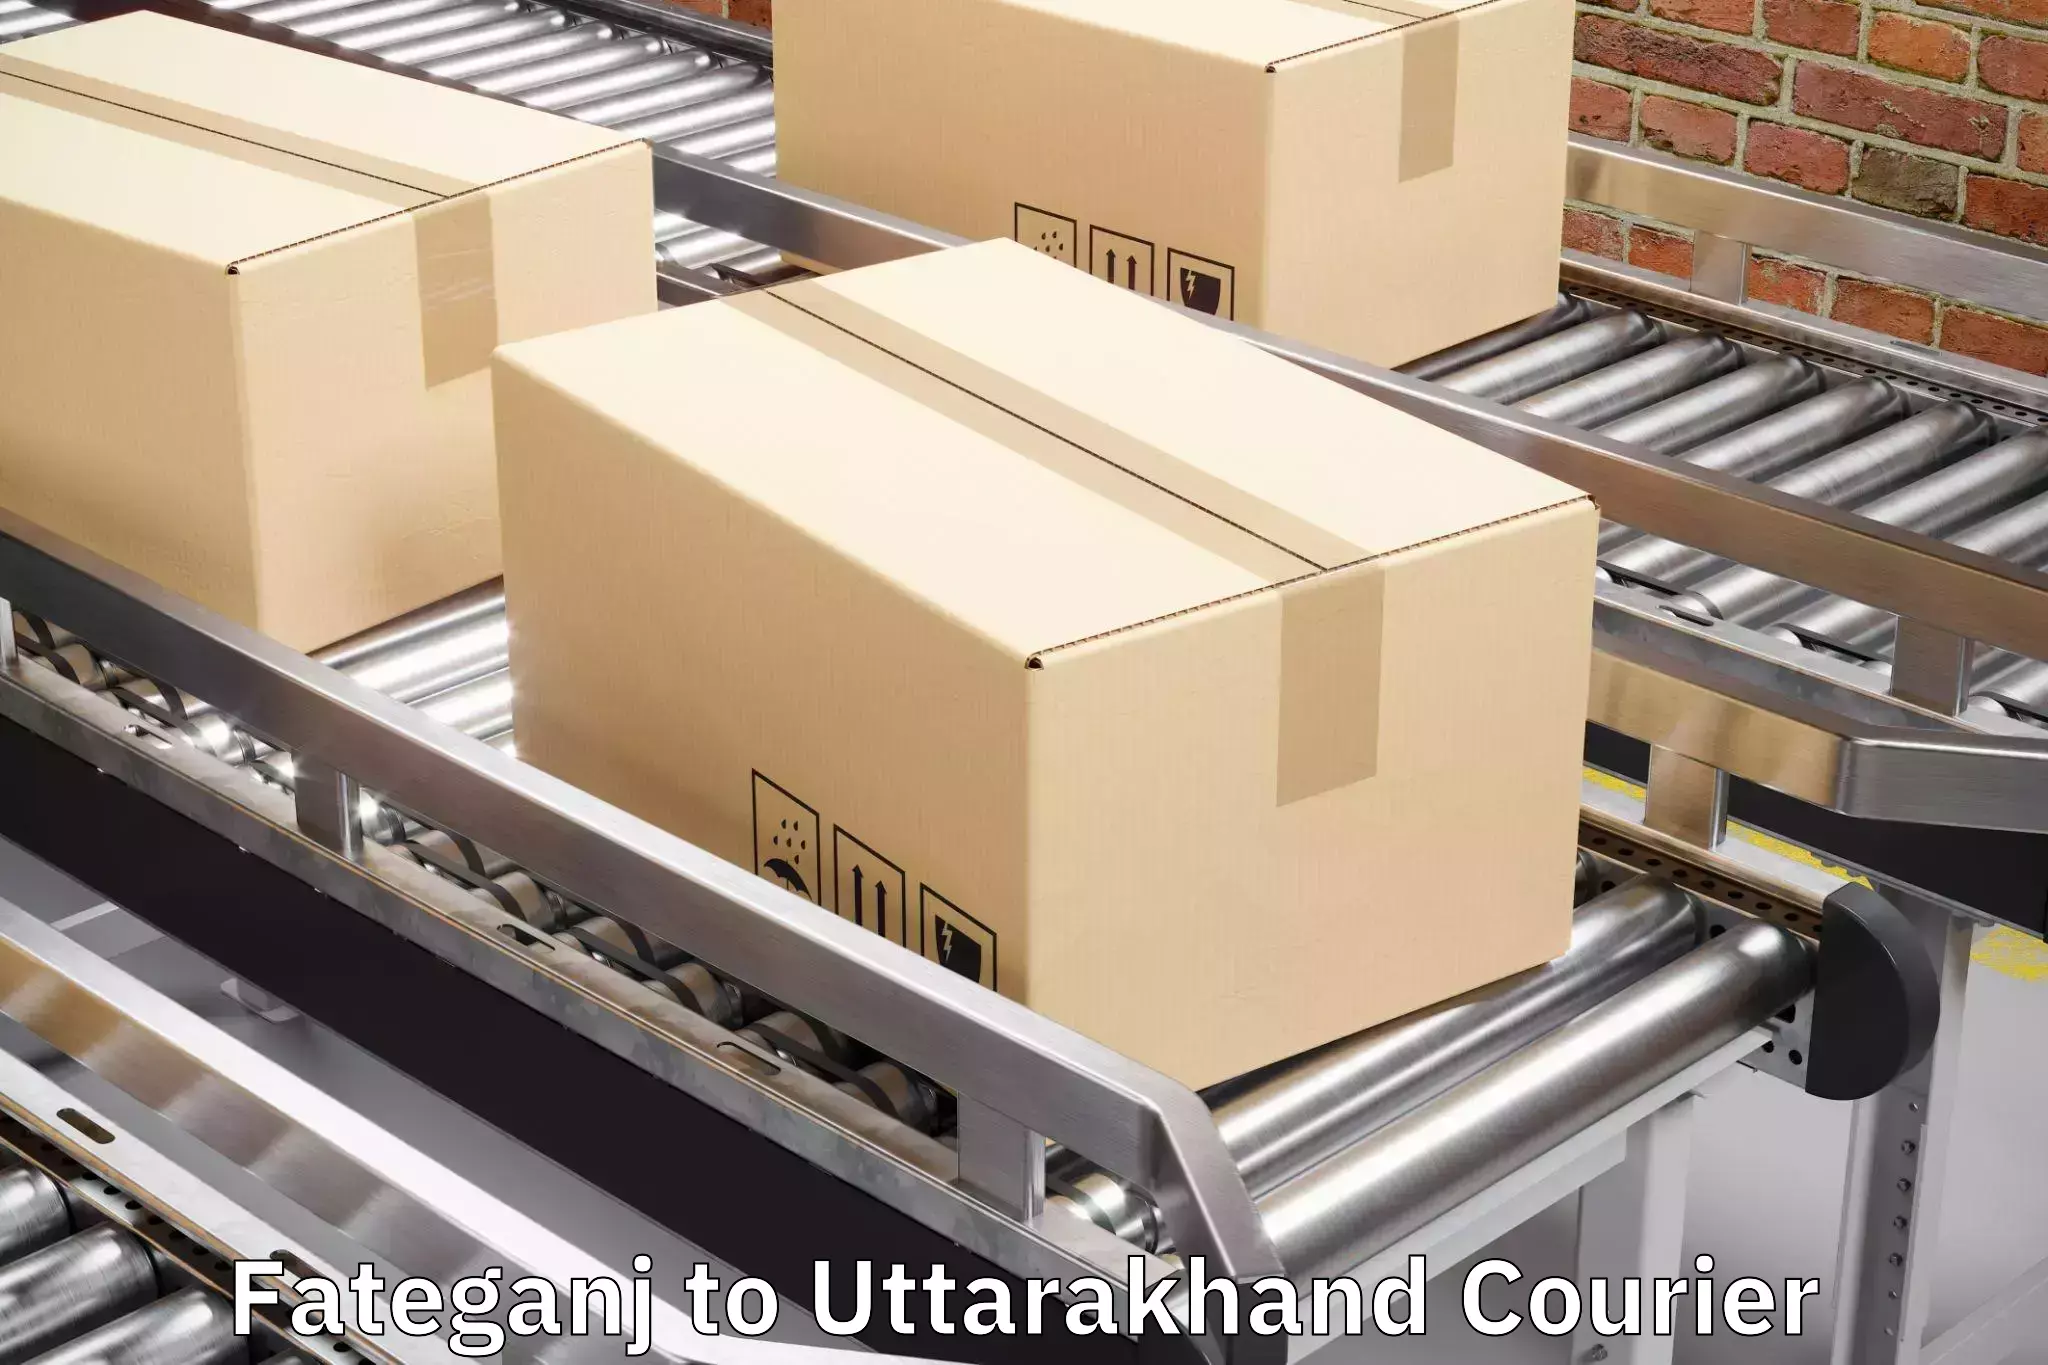 Online luggage shipping booking Fateganj to Rudrapur